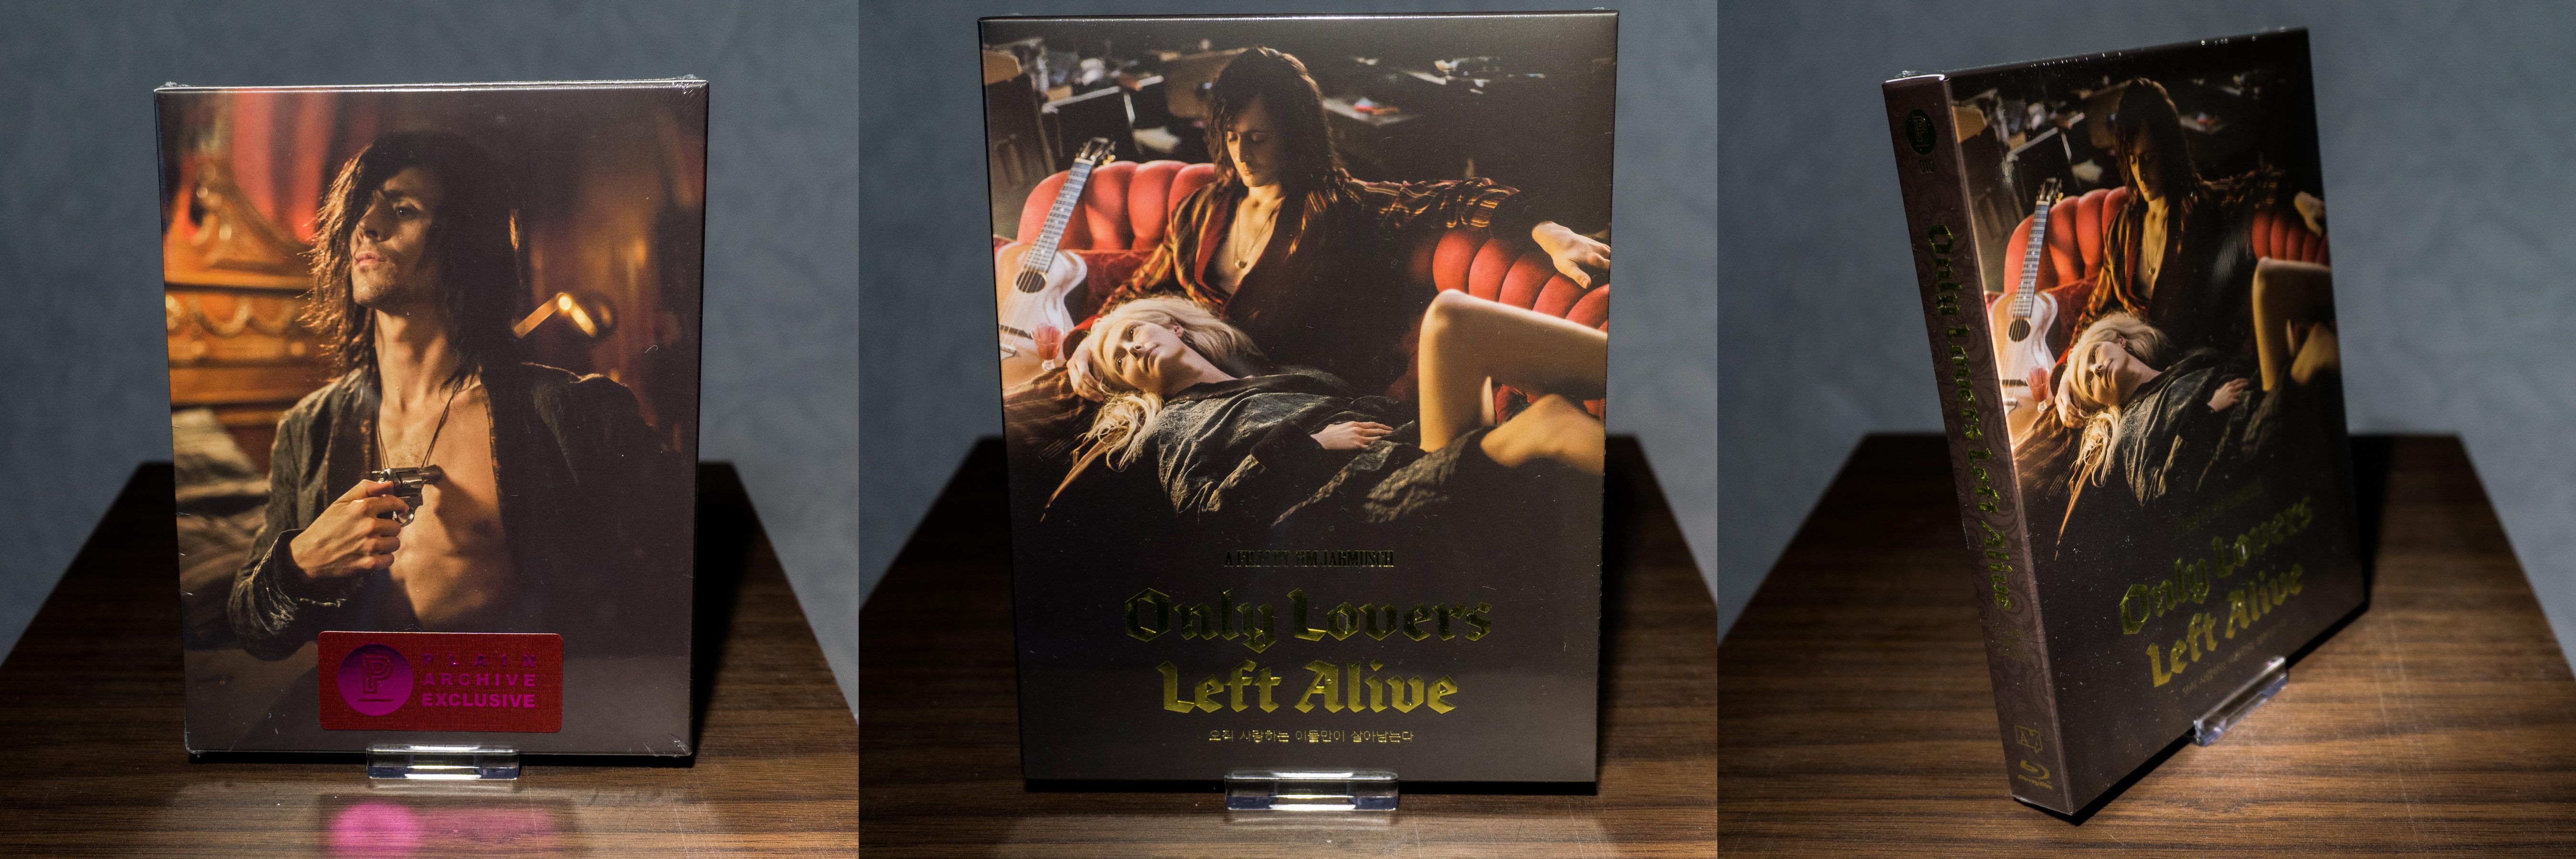 Only Lovers Left Alive Plainarchive